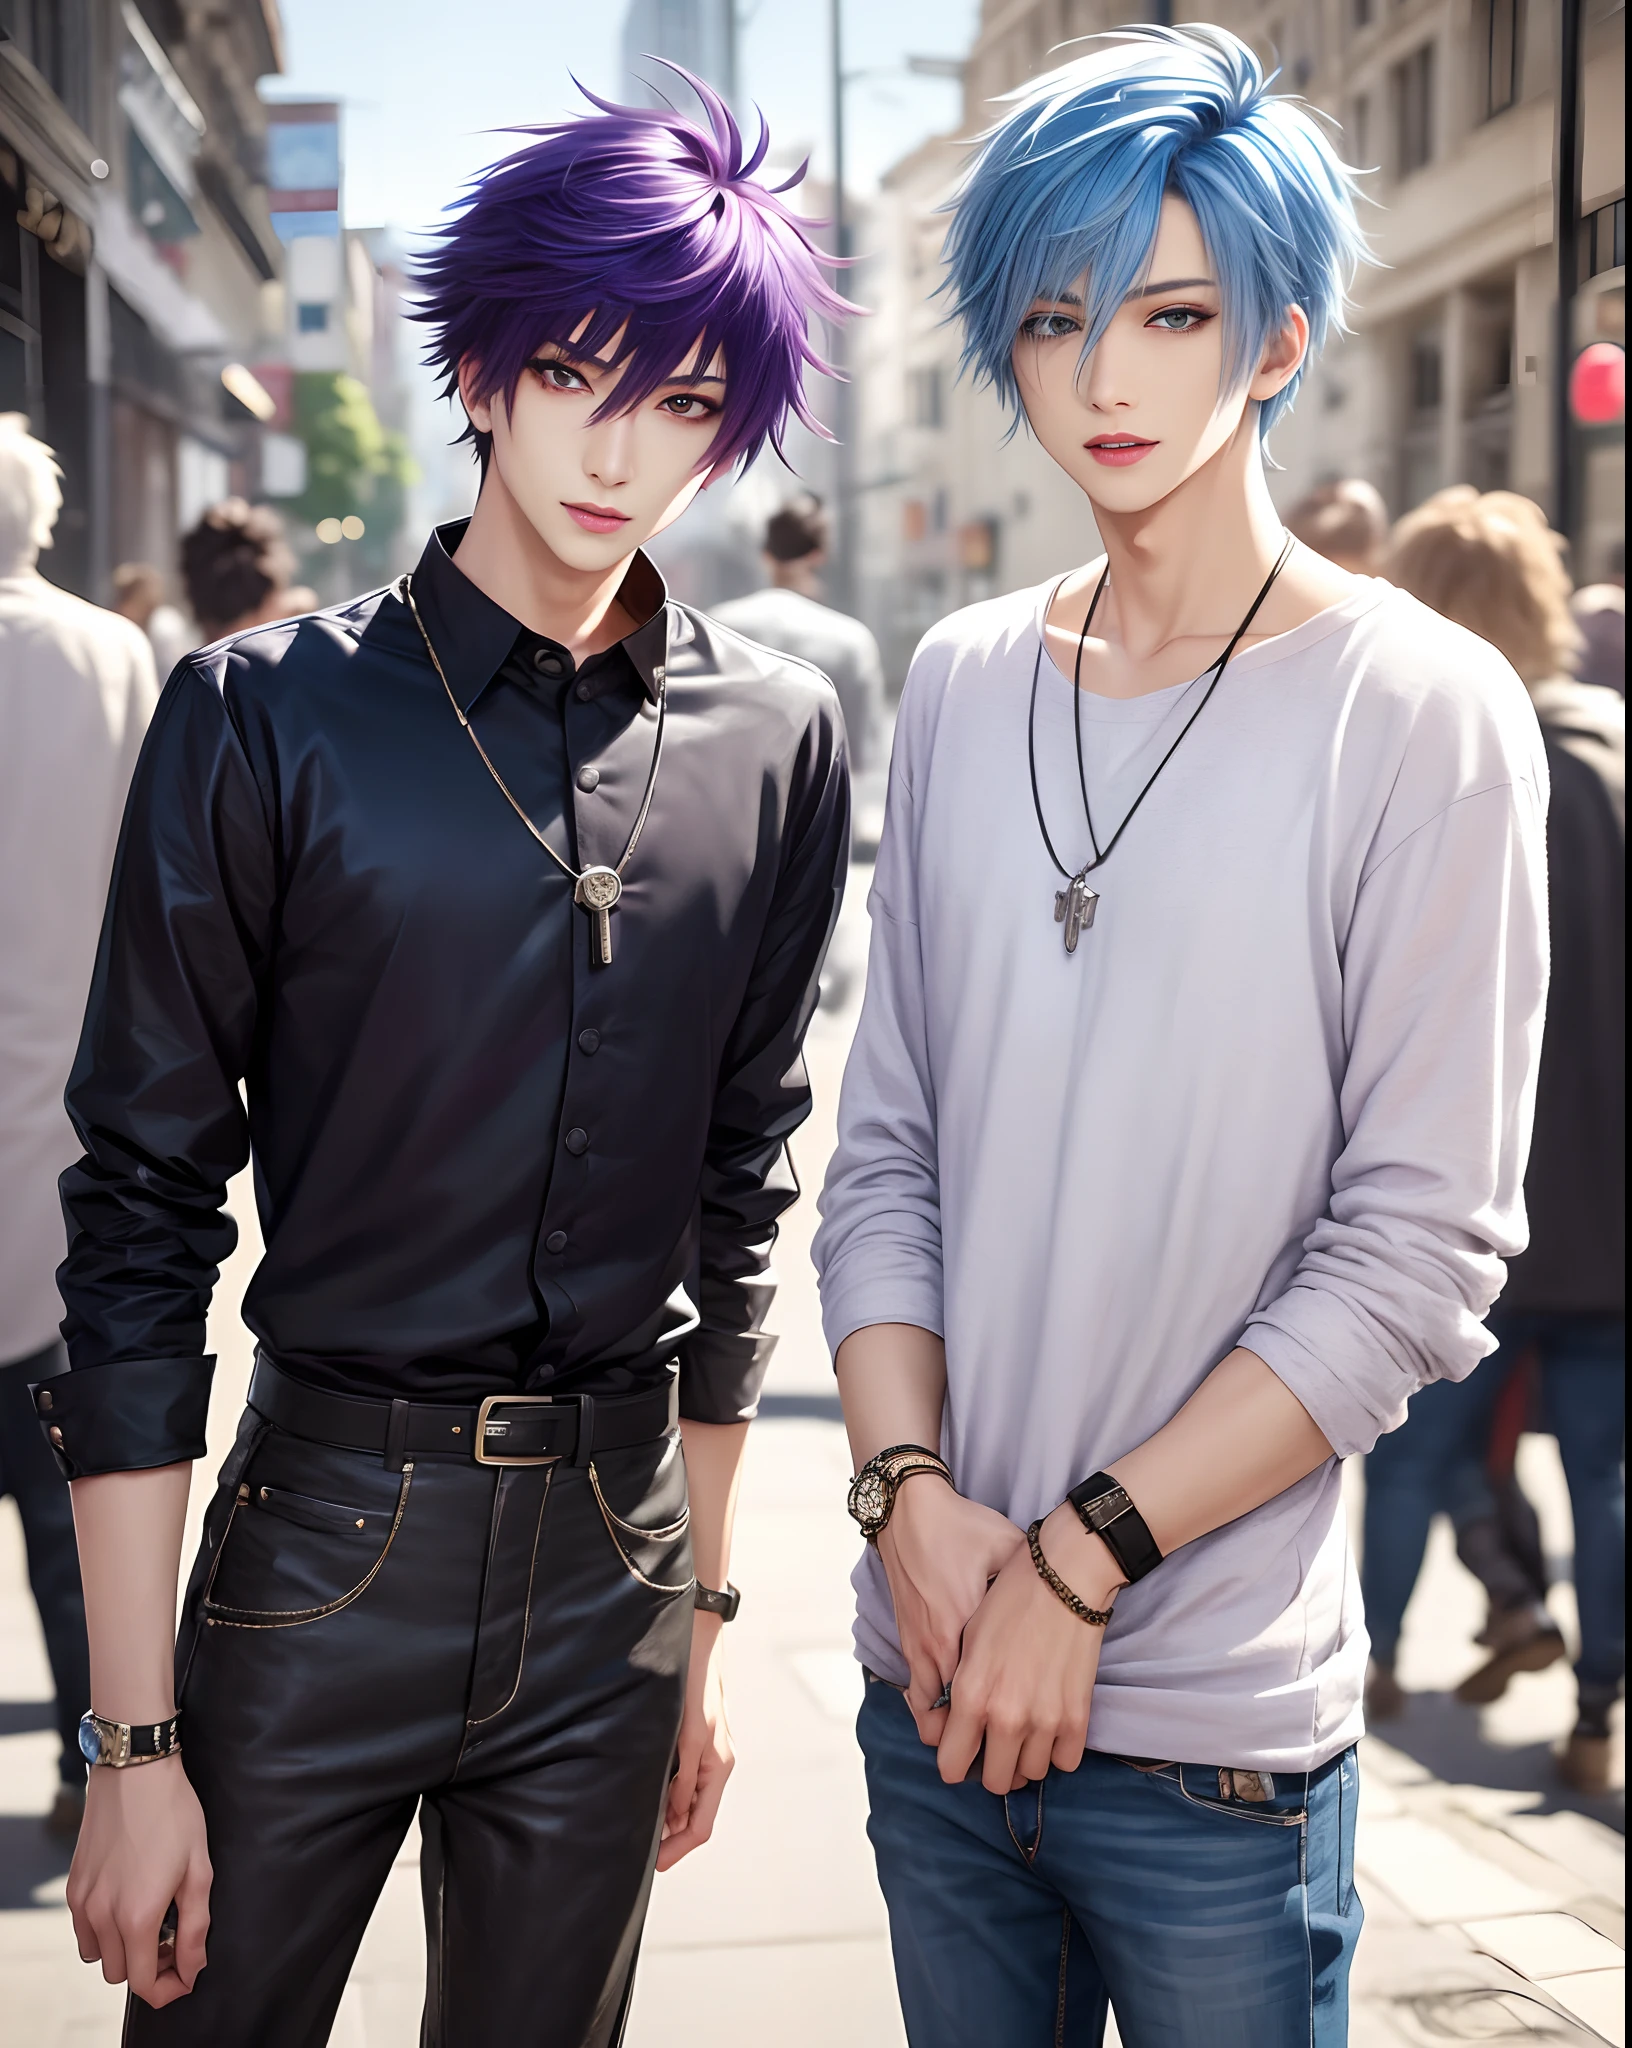 ​masterpiece, top-quality, 2Others, Male couple, 1 man and 1,, Adults, Height difference, different fashion, different color, finely eye and detailed face, intricate detailes, Casual clothing, Oversized shirt, Modern urban streets, A smile, Happiness, tenderness, queers, Boys Love, high-level image quality、 selfee, Two beautiful men、tall、The upper part of the body、nightfall、nighttime scene、𝓡𝓸𝓶𝓪𝓷𝓽𝓲𝓬、Korean Male, Idol Photos, k pop, Professional Photos, Vampires, Korean fashion in black and white, Fedoman with necklace, inspired by Sim Sa-jeong, androgynous vampire, :9 detailed face: 8, extra detailed face, detailed punk hair, ((eyes are brown)) baggy eyes, Seductive. Highly detailed, semi realistic anime, Vampires, hyperrealistic teen, delicate androgynous prince, imvu, short hair above the ears, Man with short hair, With a purple-haired man with a wild expression, Man with light blue hair with gentle expression, ((With a short-haired man with bright purple hair)), ((Man with light blue hair))